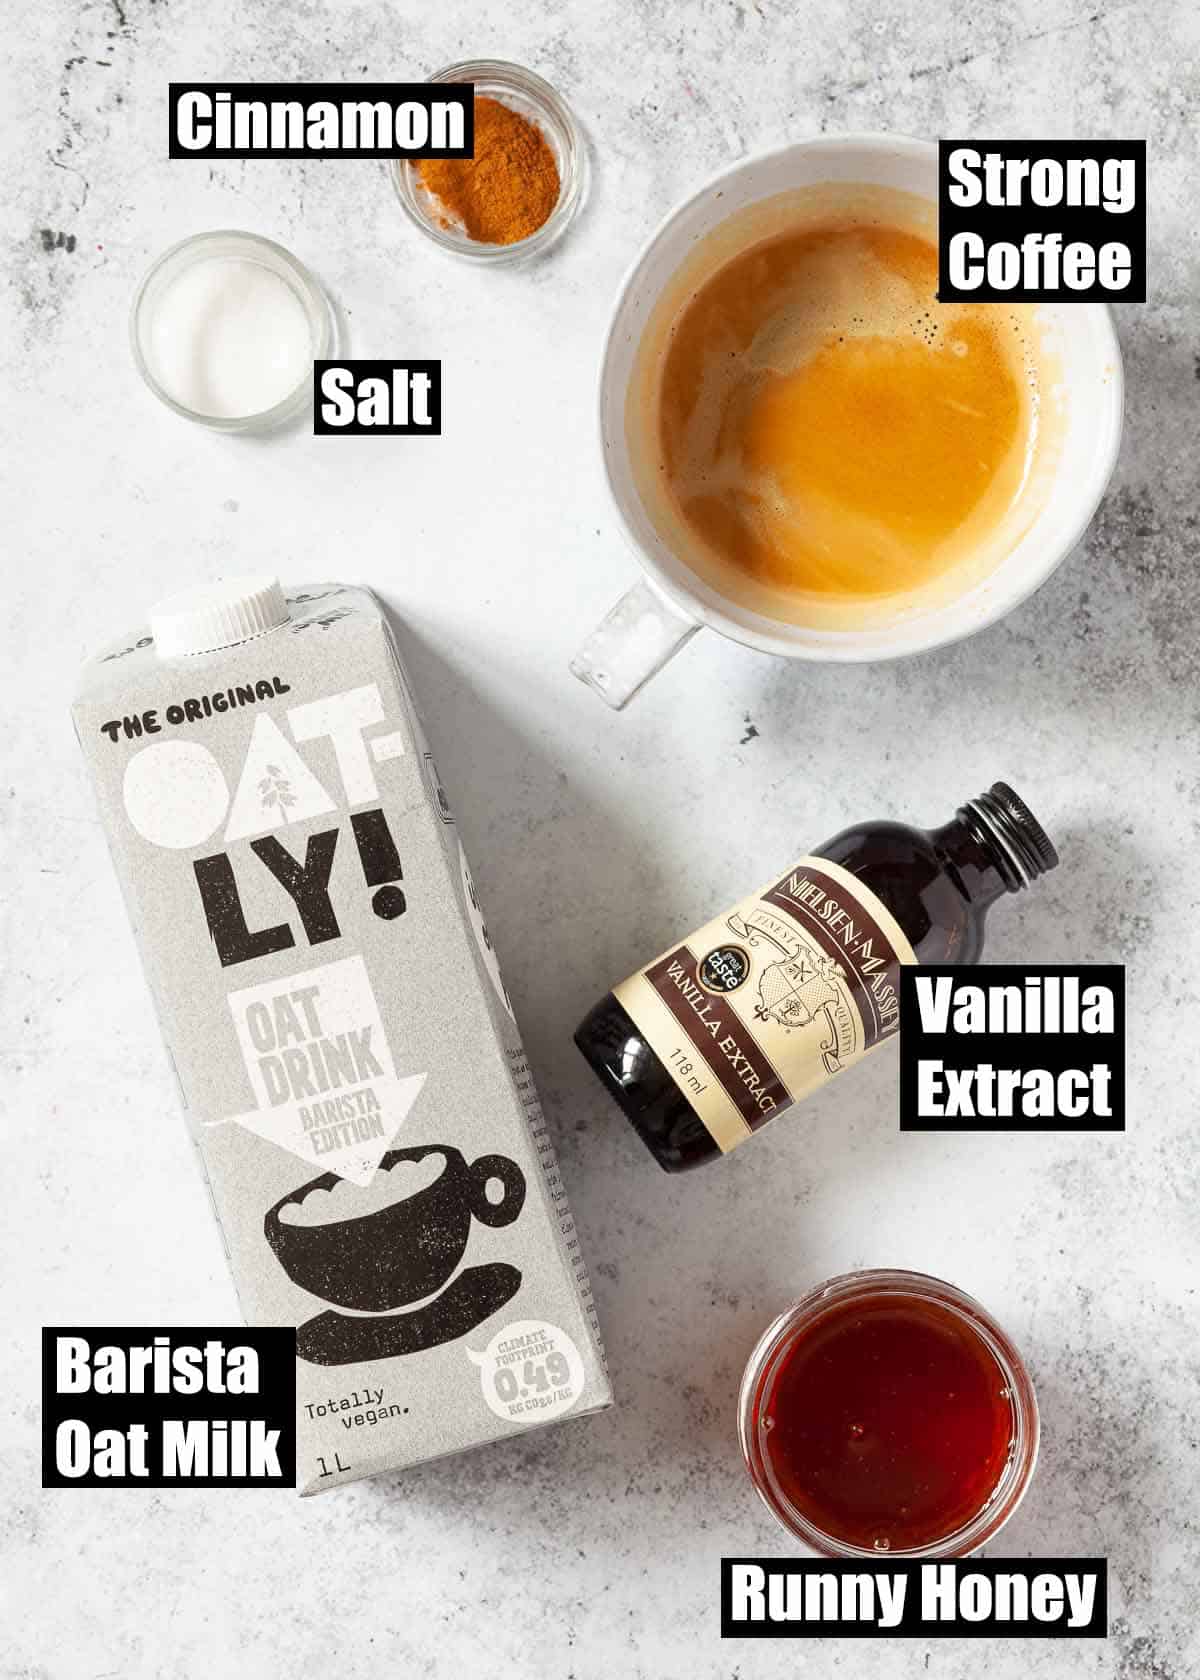 Labelled ingredients for a plant-based milky coffee drink.